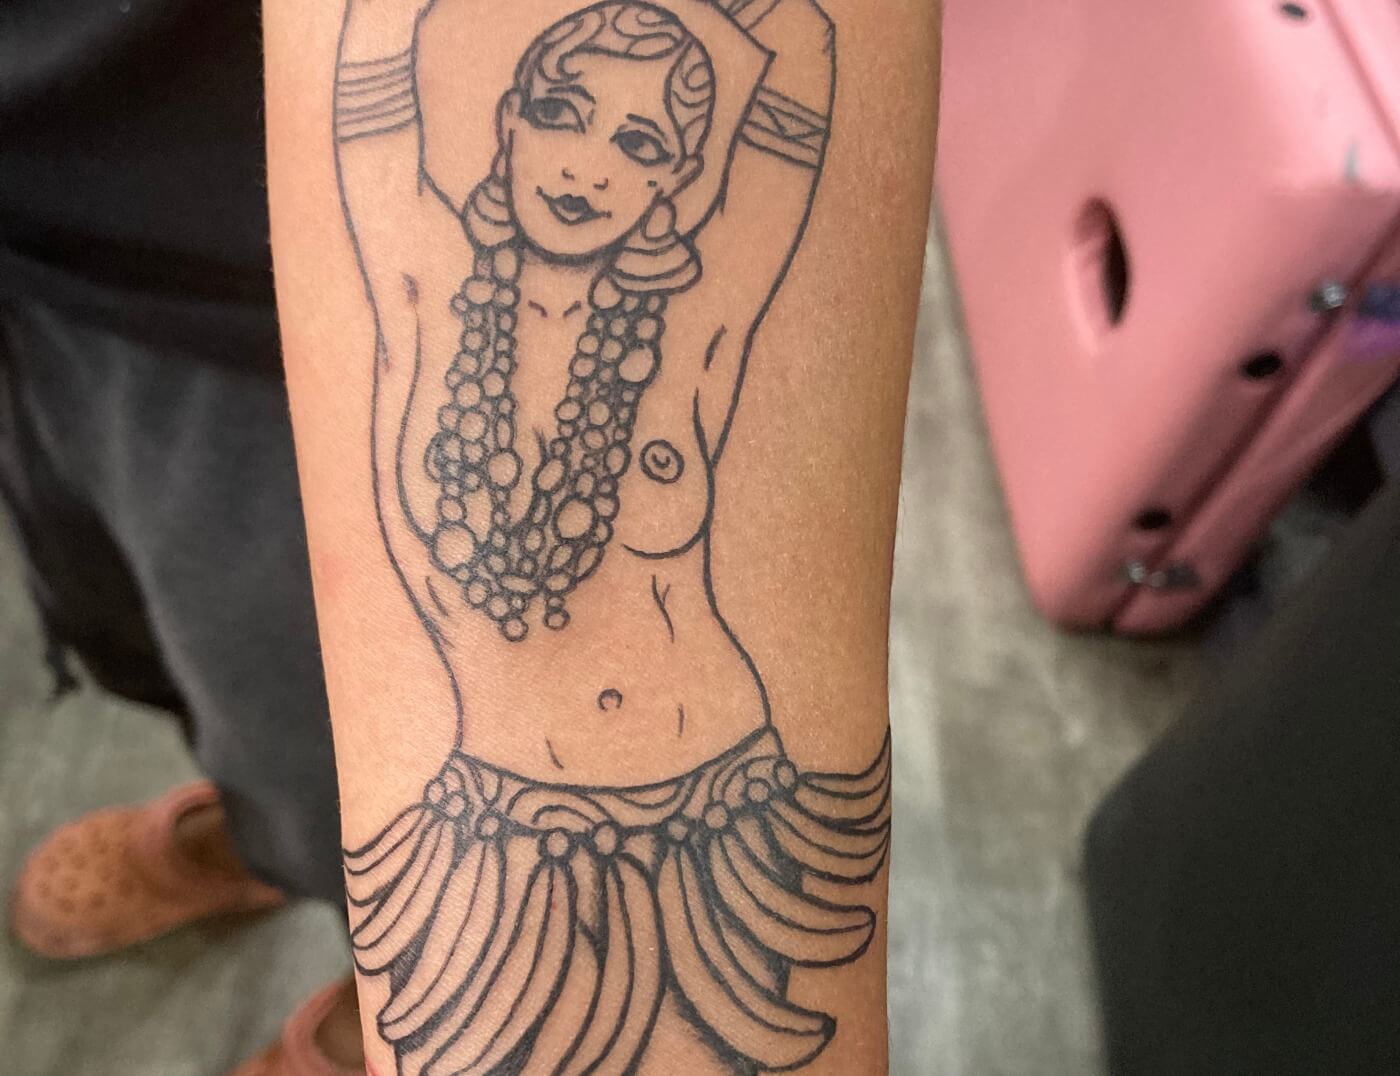 Josephine Baker Black & Grey Banana Dance Tattoo By Funk Tha World At Iron Palm Tattoos In Atlanta, GA. Her iconic topless banana dance performance, in which she wore a skirt made of bananas, has become an enduring symbol of female empowerment and black pride. We're open late night most nights until 2 AM. Call 404-973-7828 or stop by for a free consultation with Funk or another Iron Palm body artist. Walk Ins are welcome.